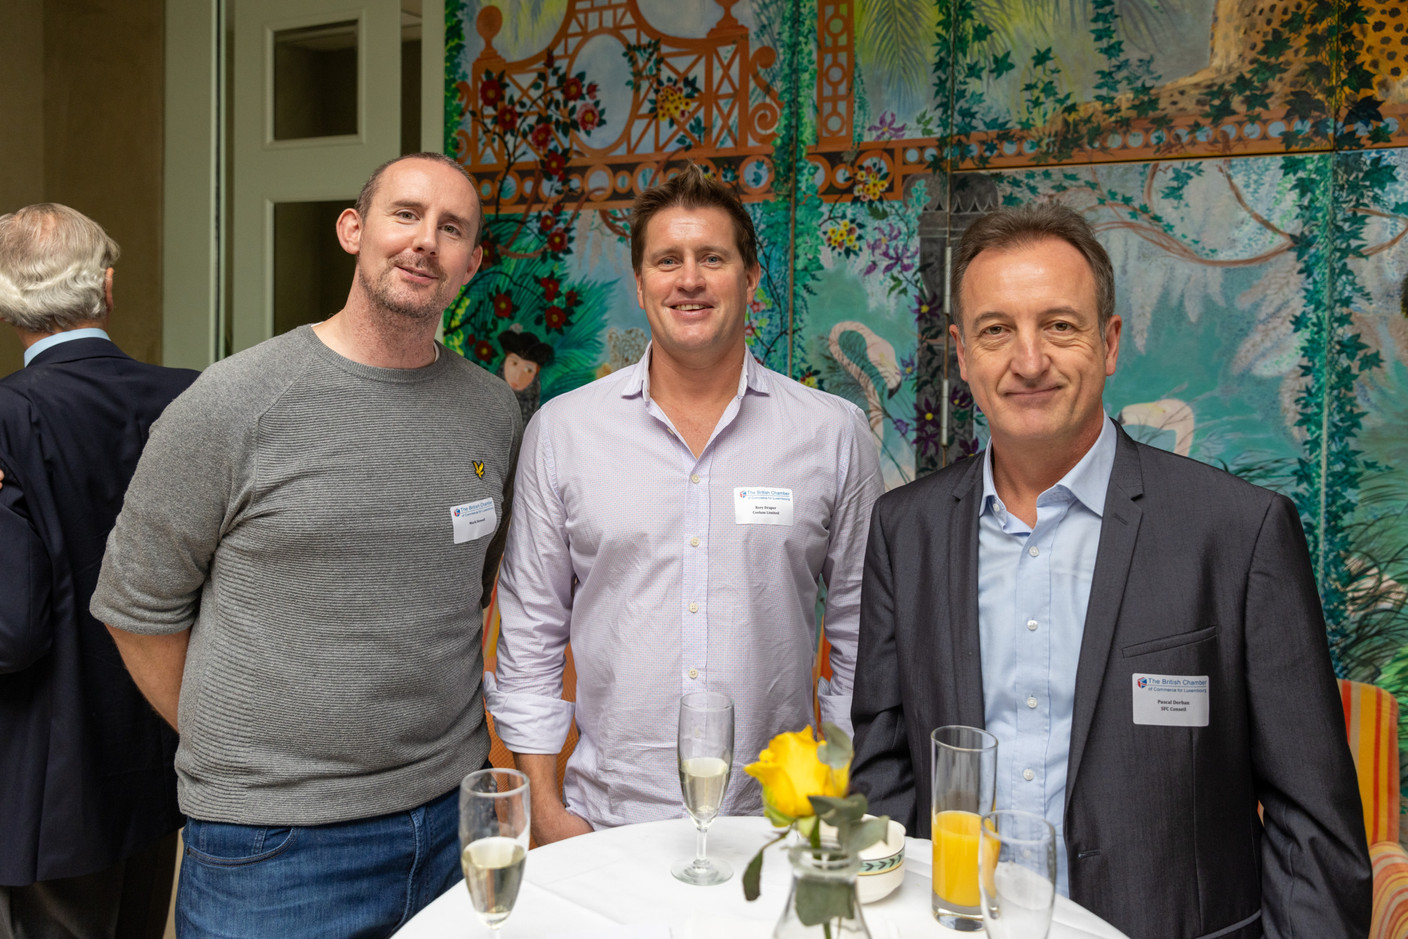 Mark Howell, Rory Draper and Pascal Dorban at the BCC & Amcham Personal Tax Lunch on 21 November 2023. Photo: Romain Gamba / Maison Moderne